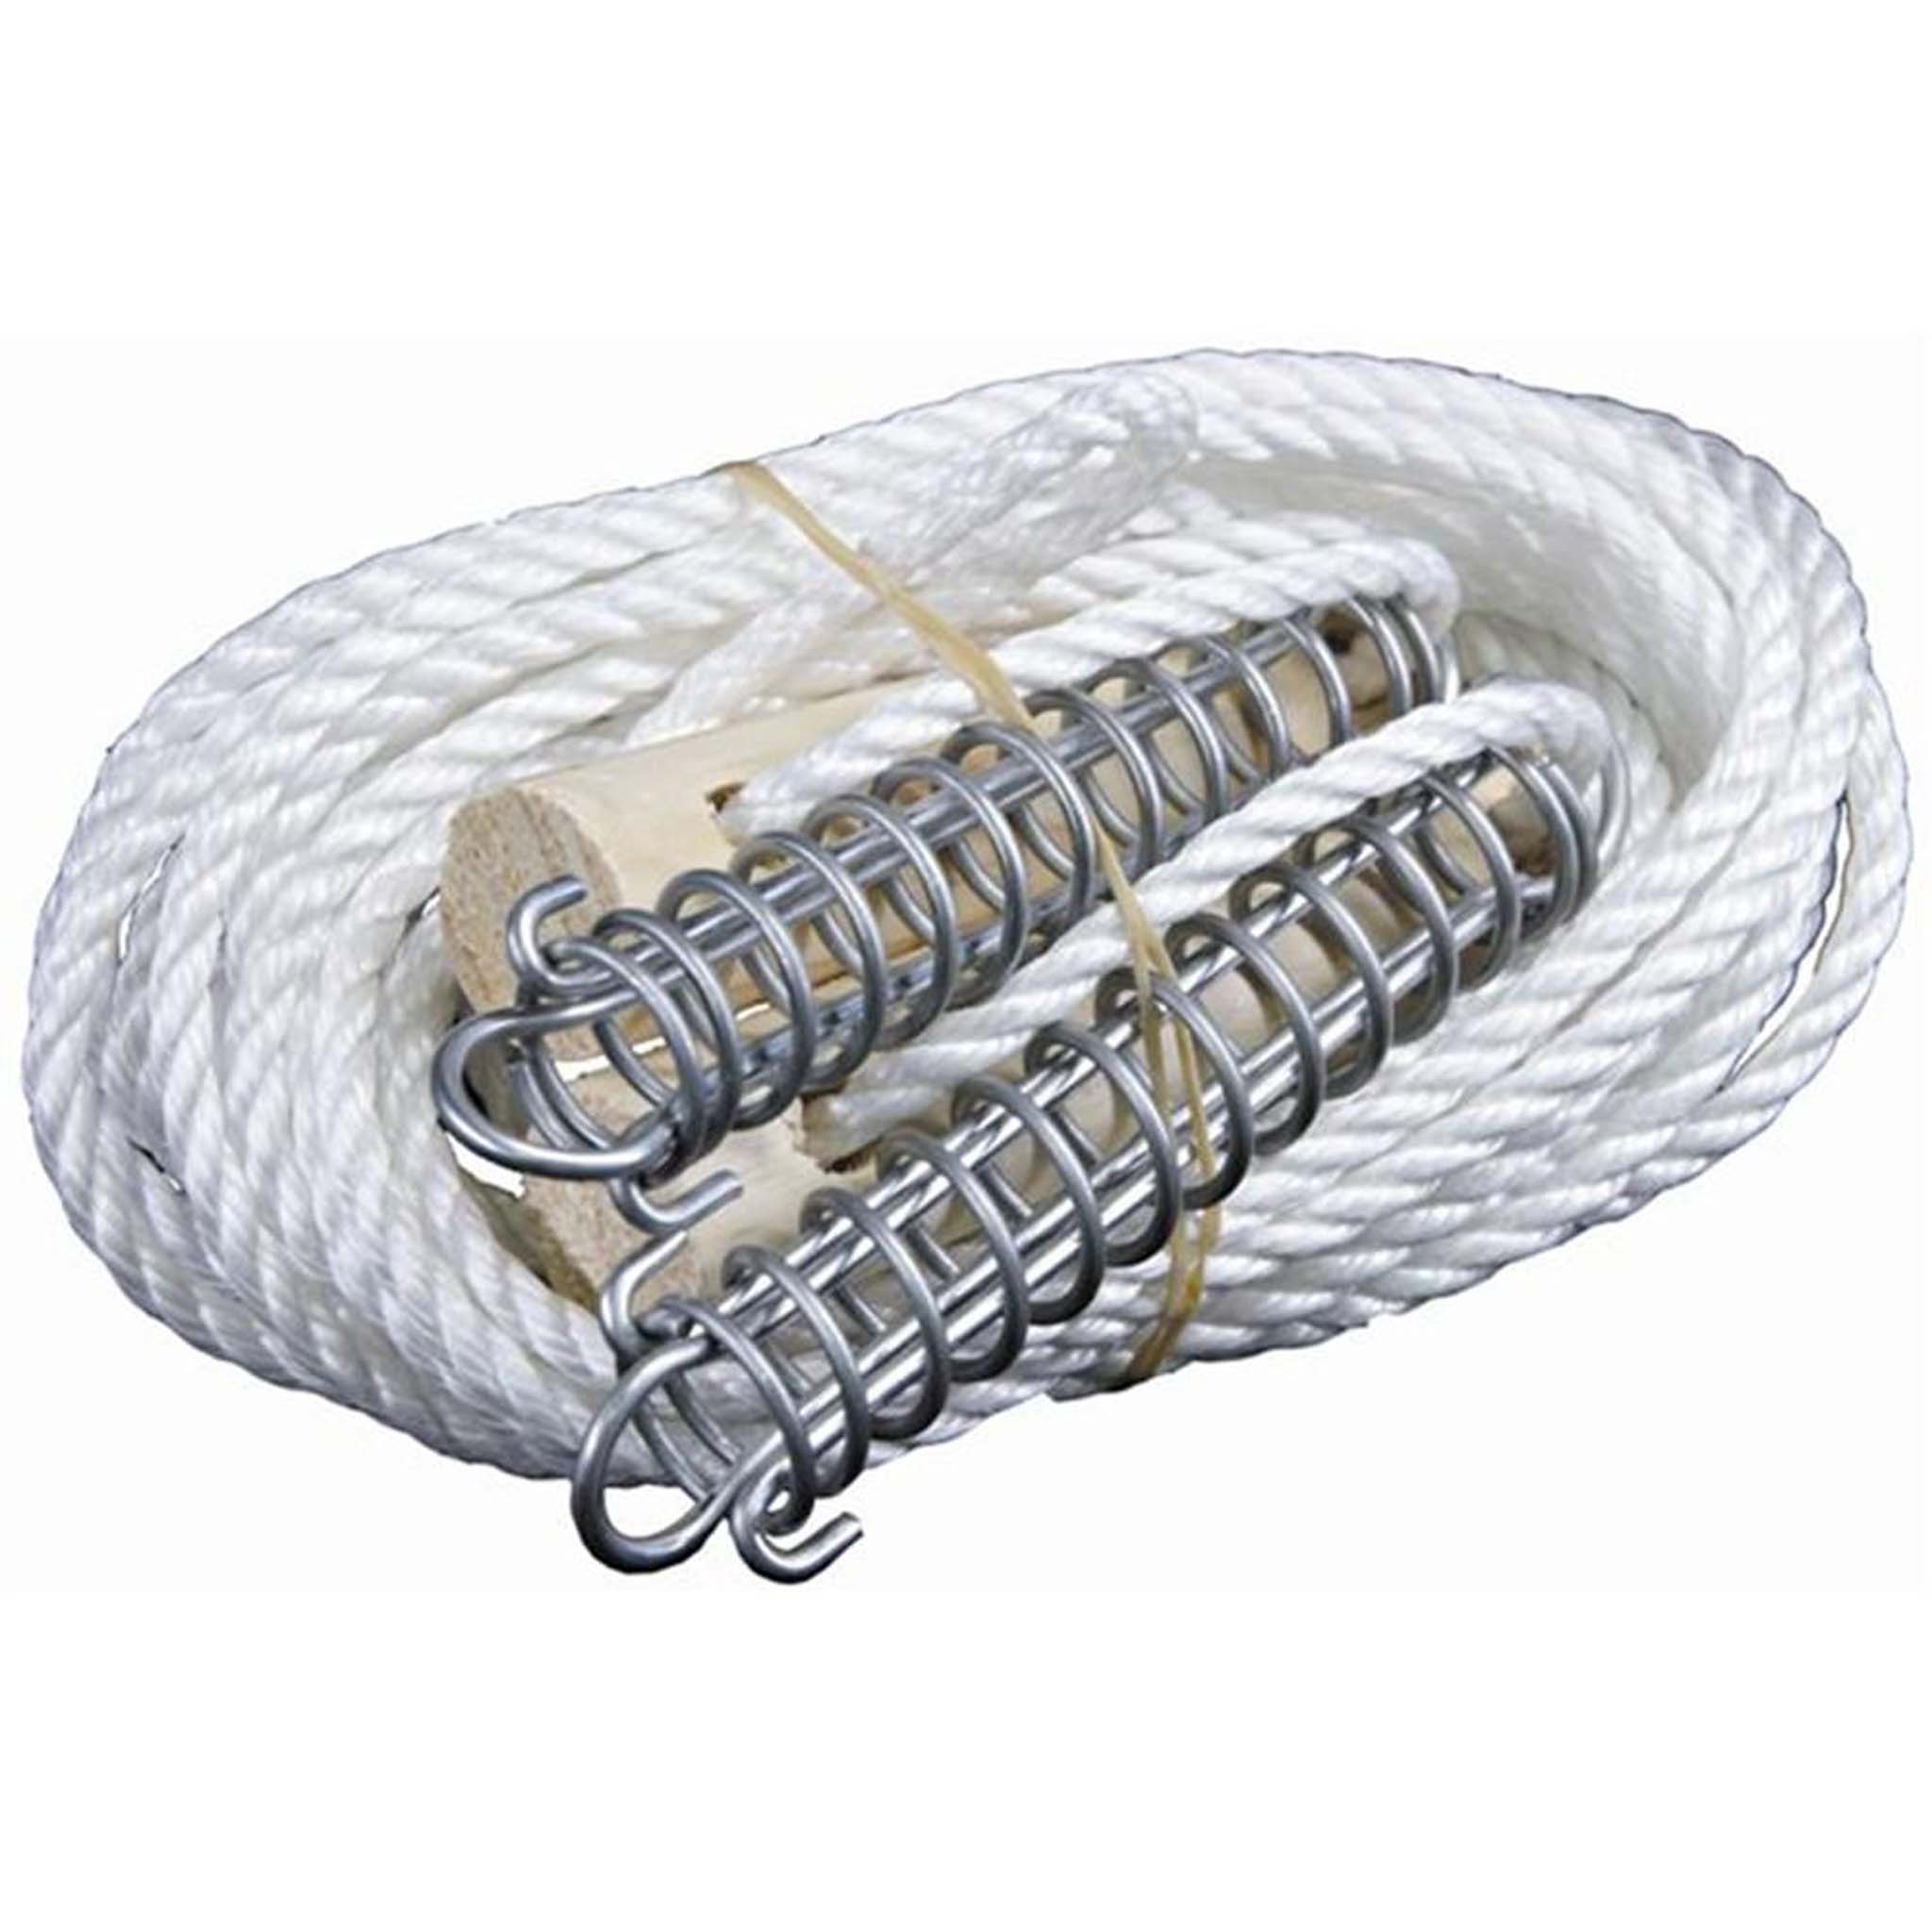 Guy ropes  Tent ropes for secure outdoor adventures